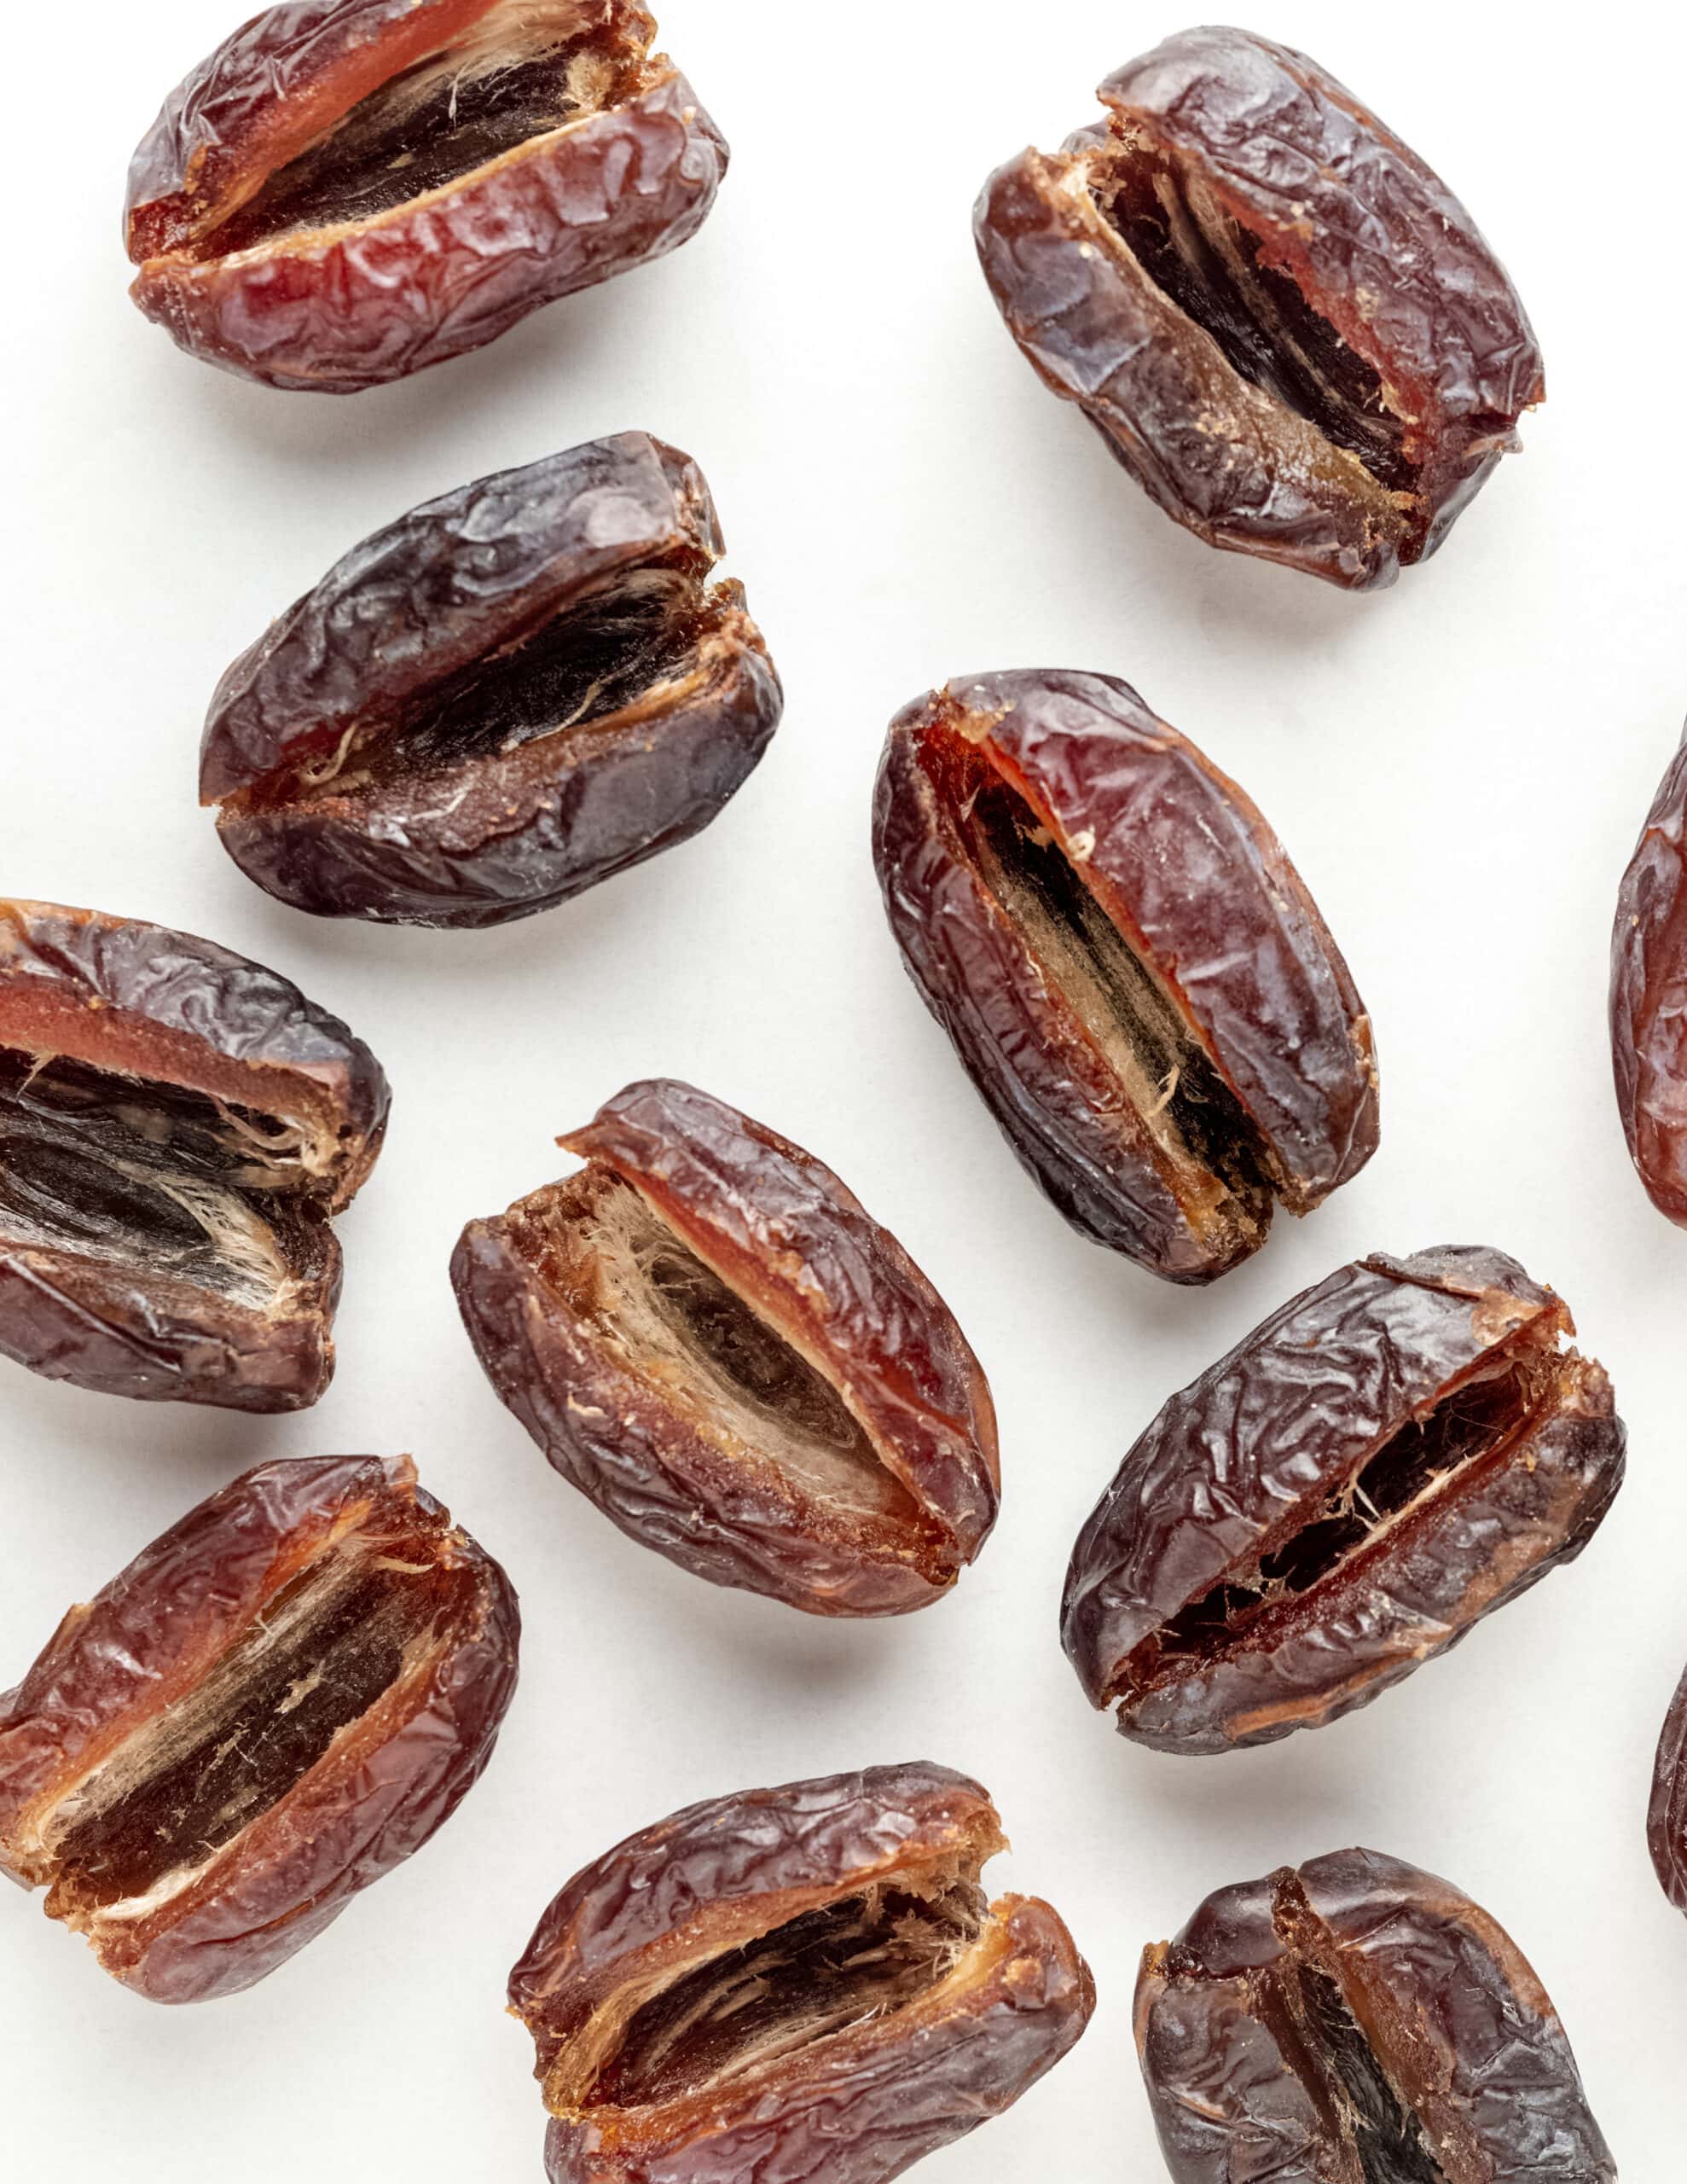 Dates that are split open with the pits removed.